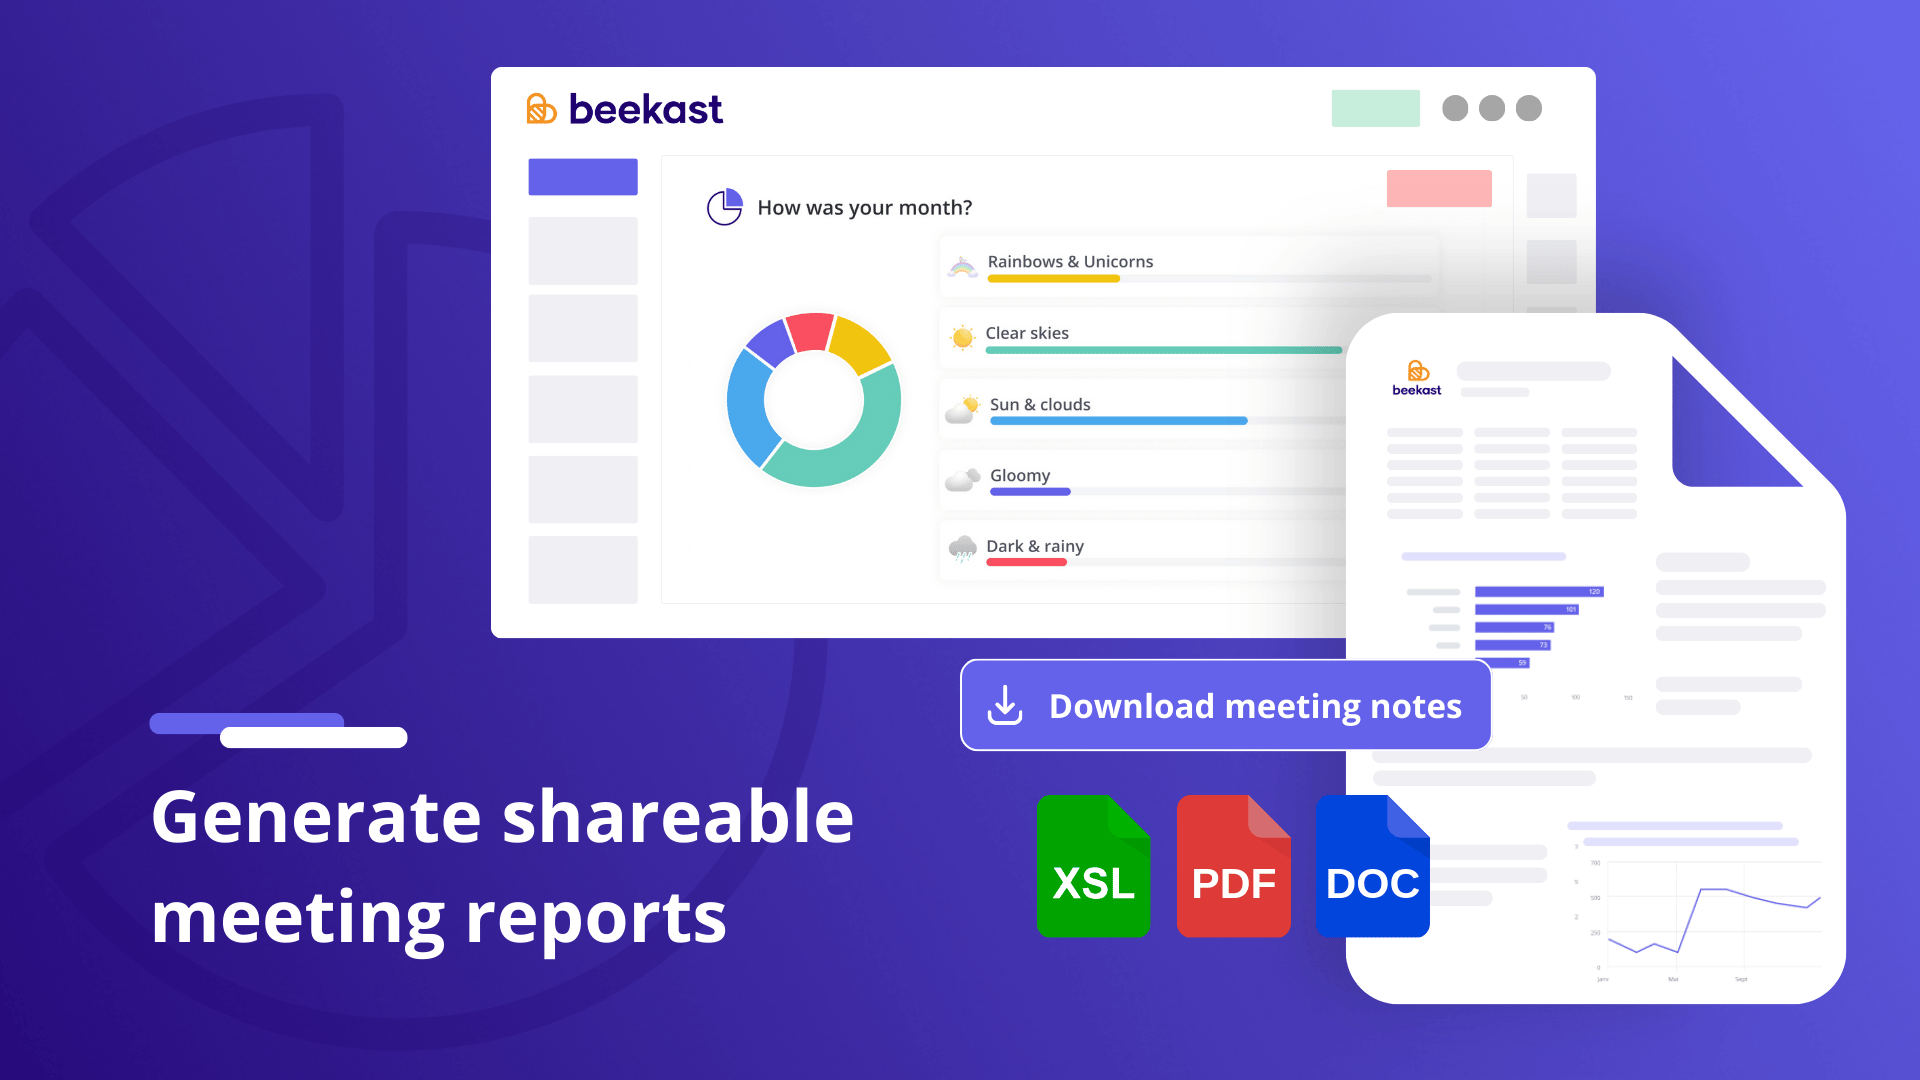 Beekast - Download minutes right after your meeting as well as complete reports generated throughout your meetings, training sessions and events.